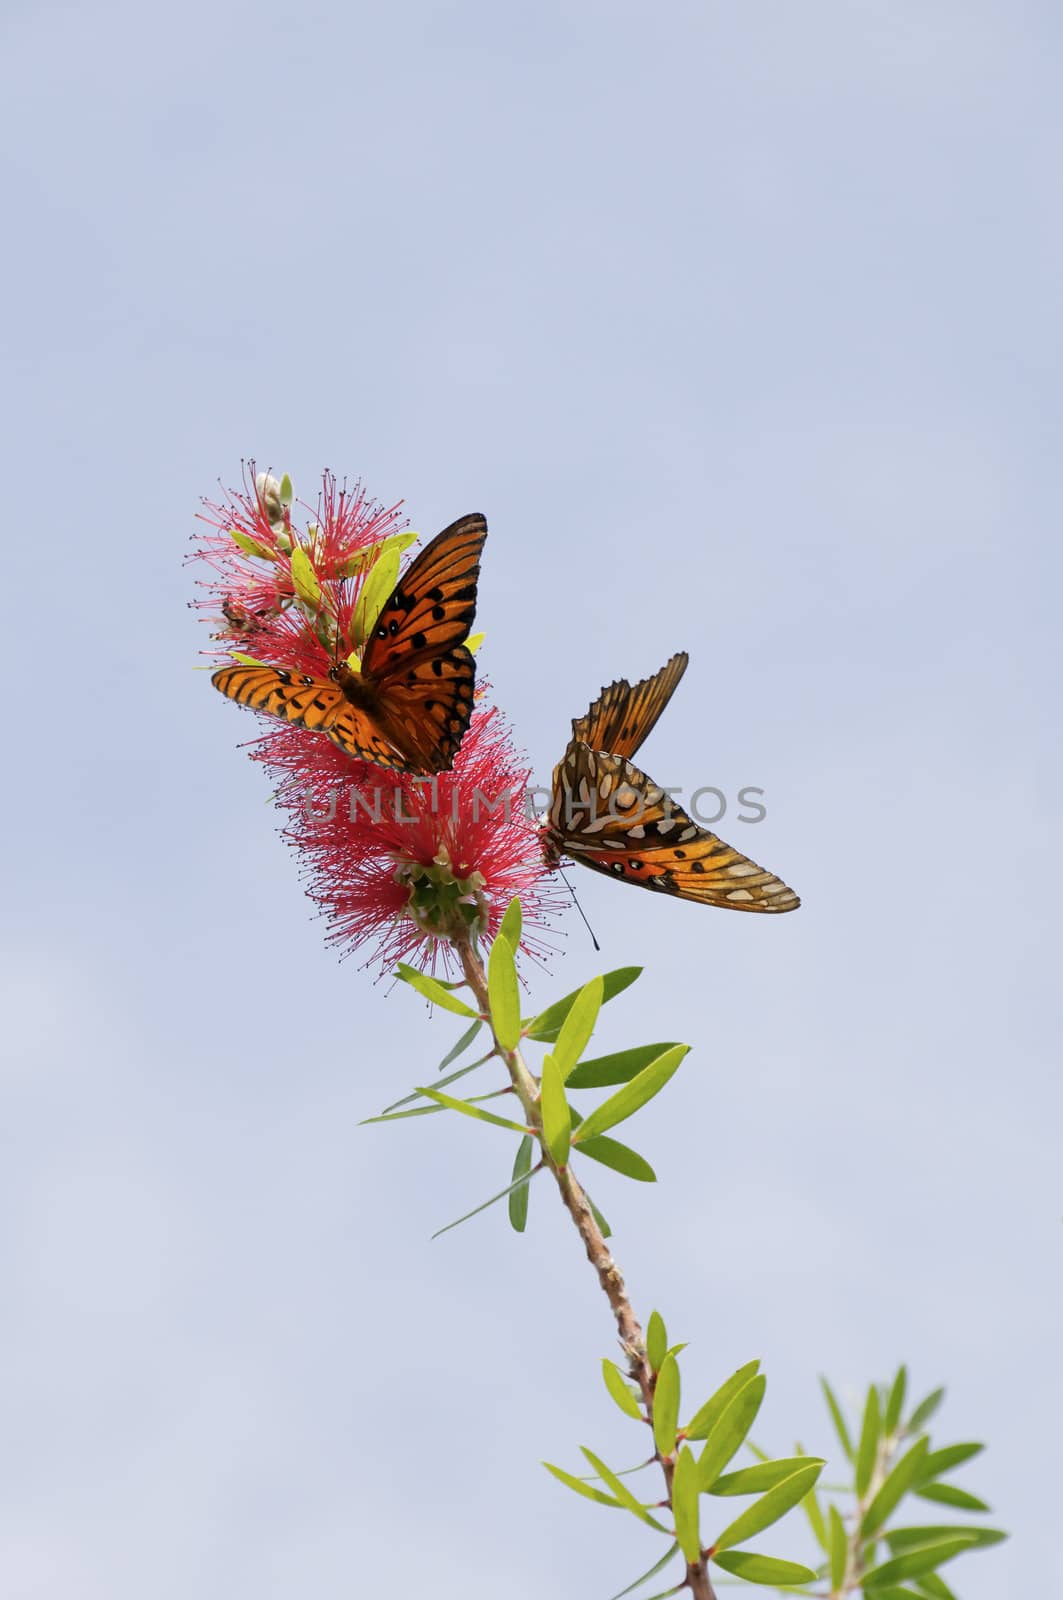 Two gulf fritillary butterflies on the same red flower against a blue sky.